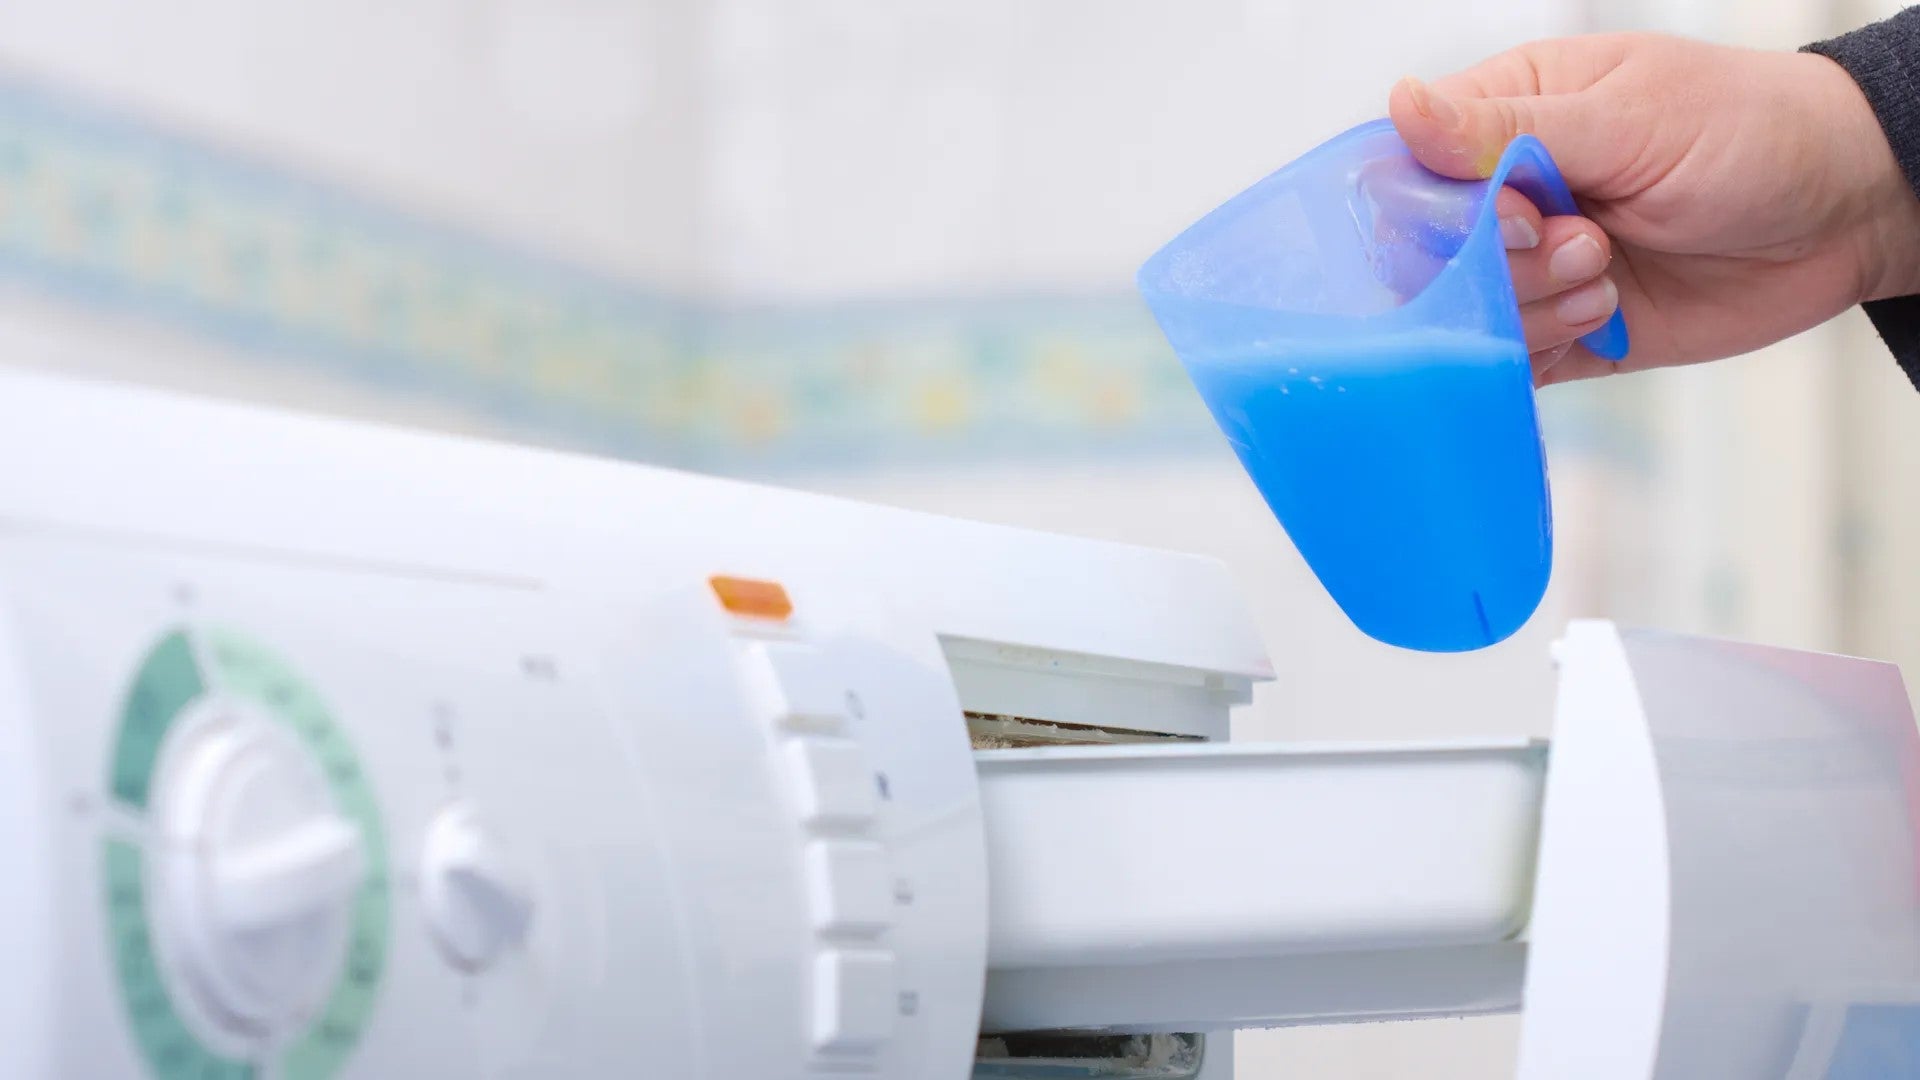 Everything You Need To Know About Fabric Softener